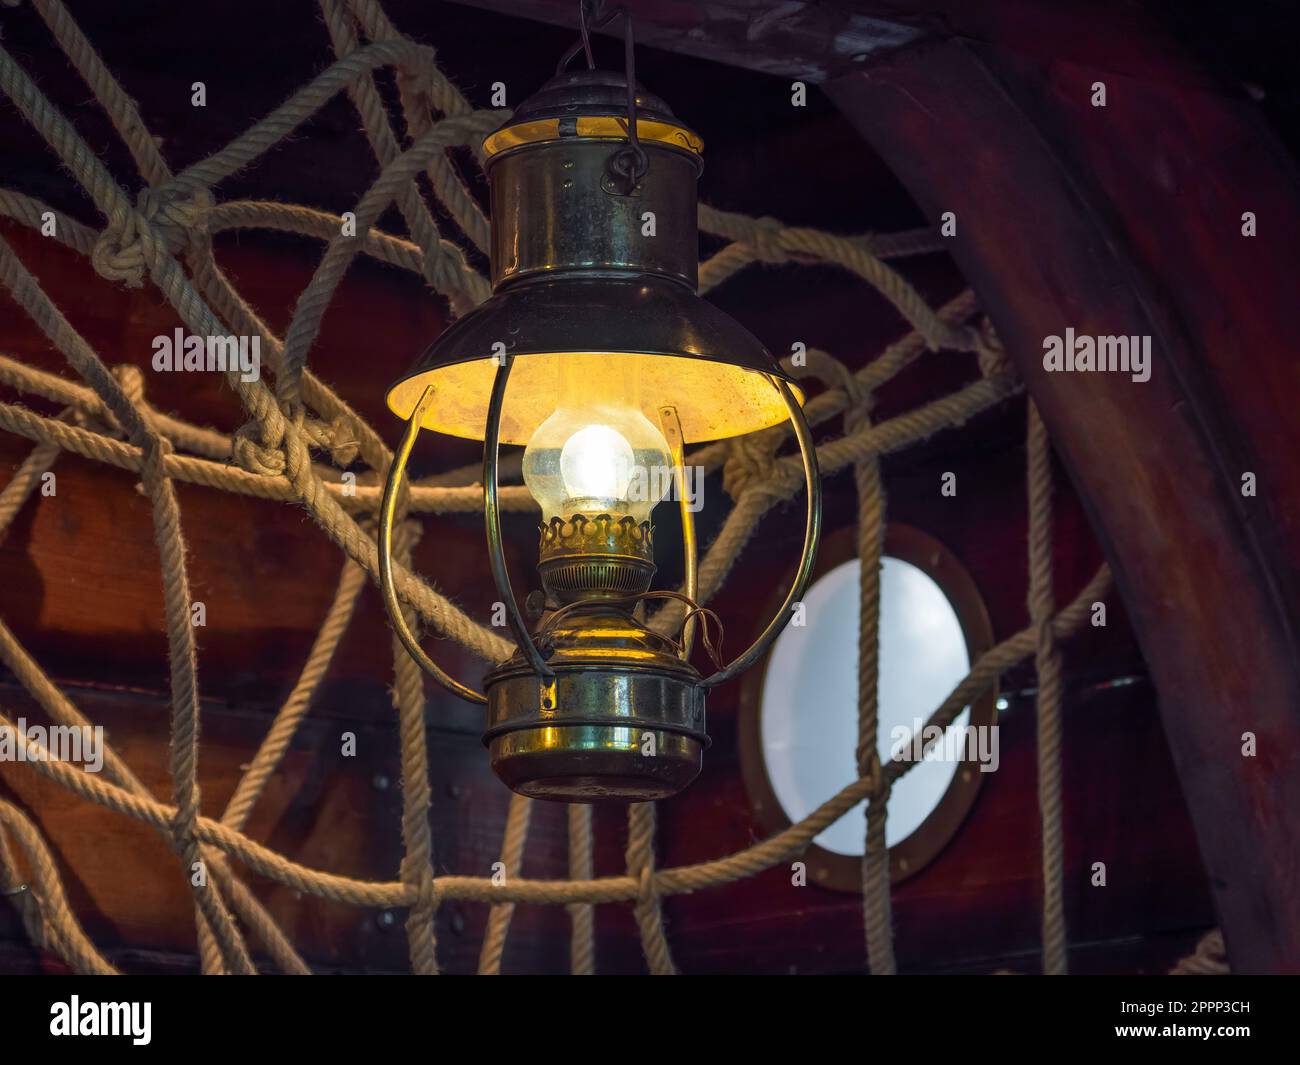 A vintage fishing boat with an old cabin interior lit by retro lighting equipment Stock Photo